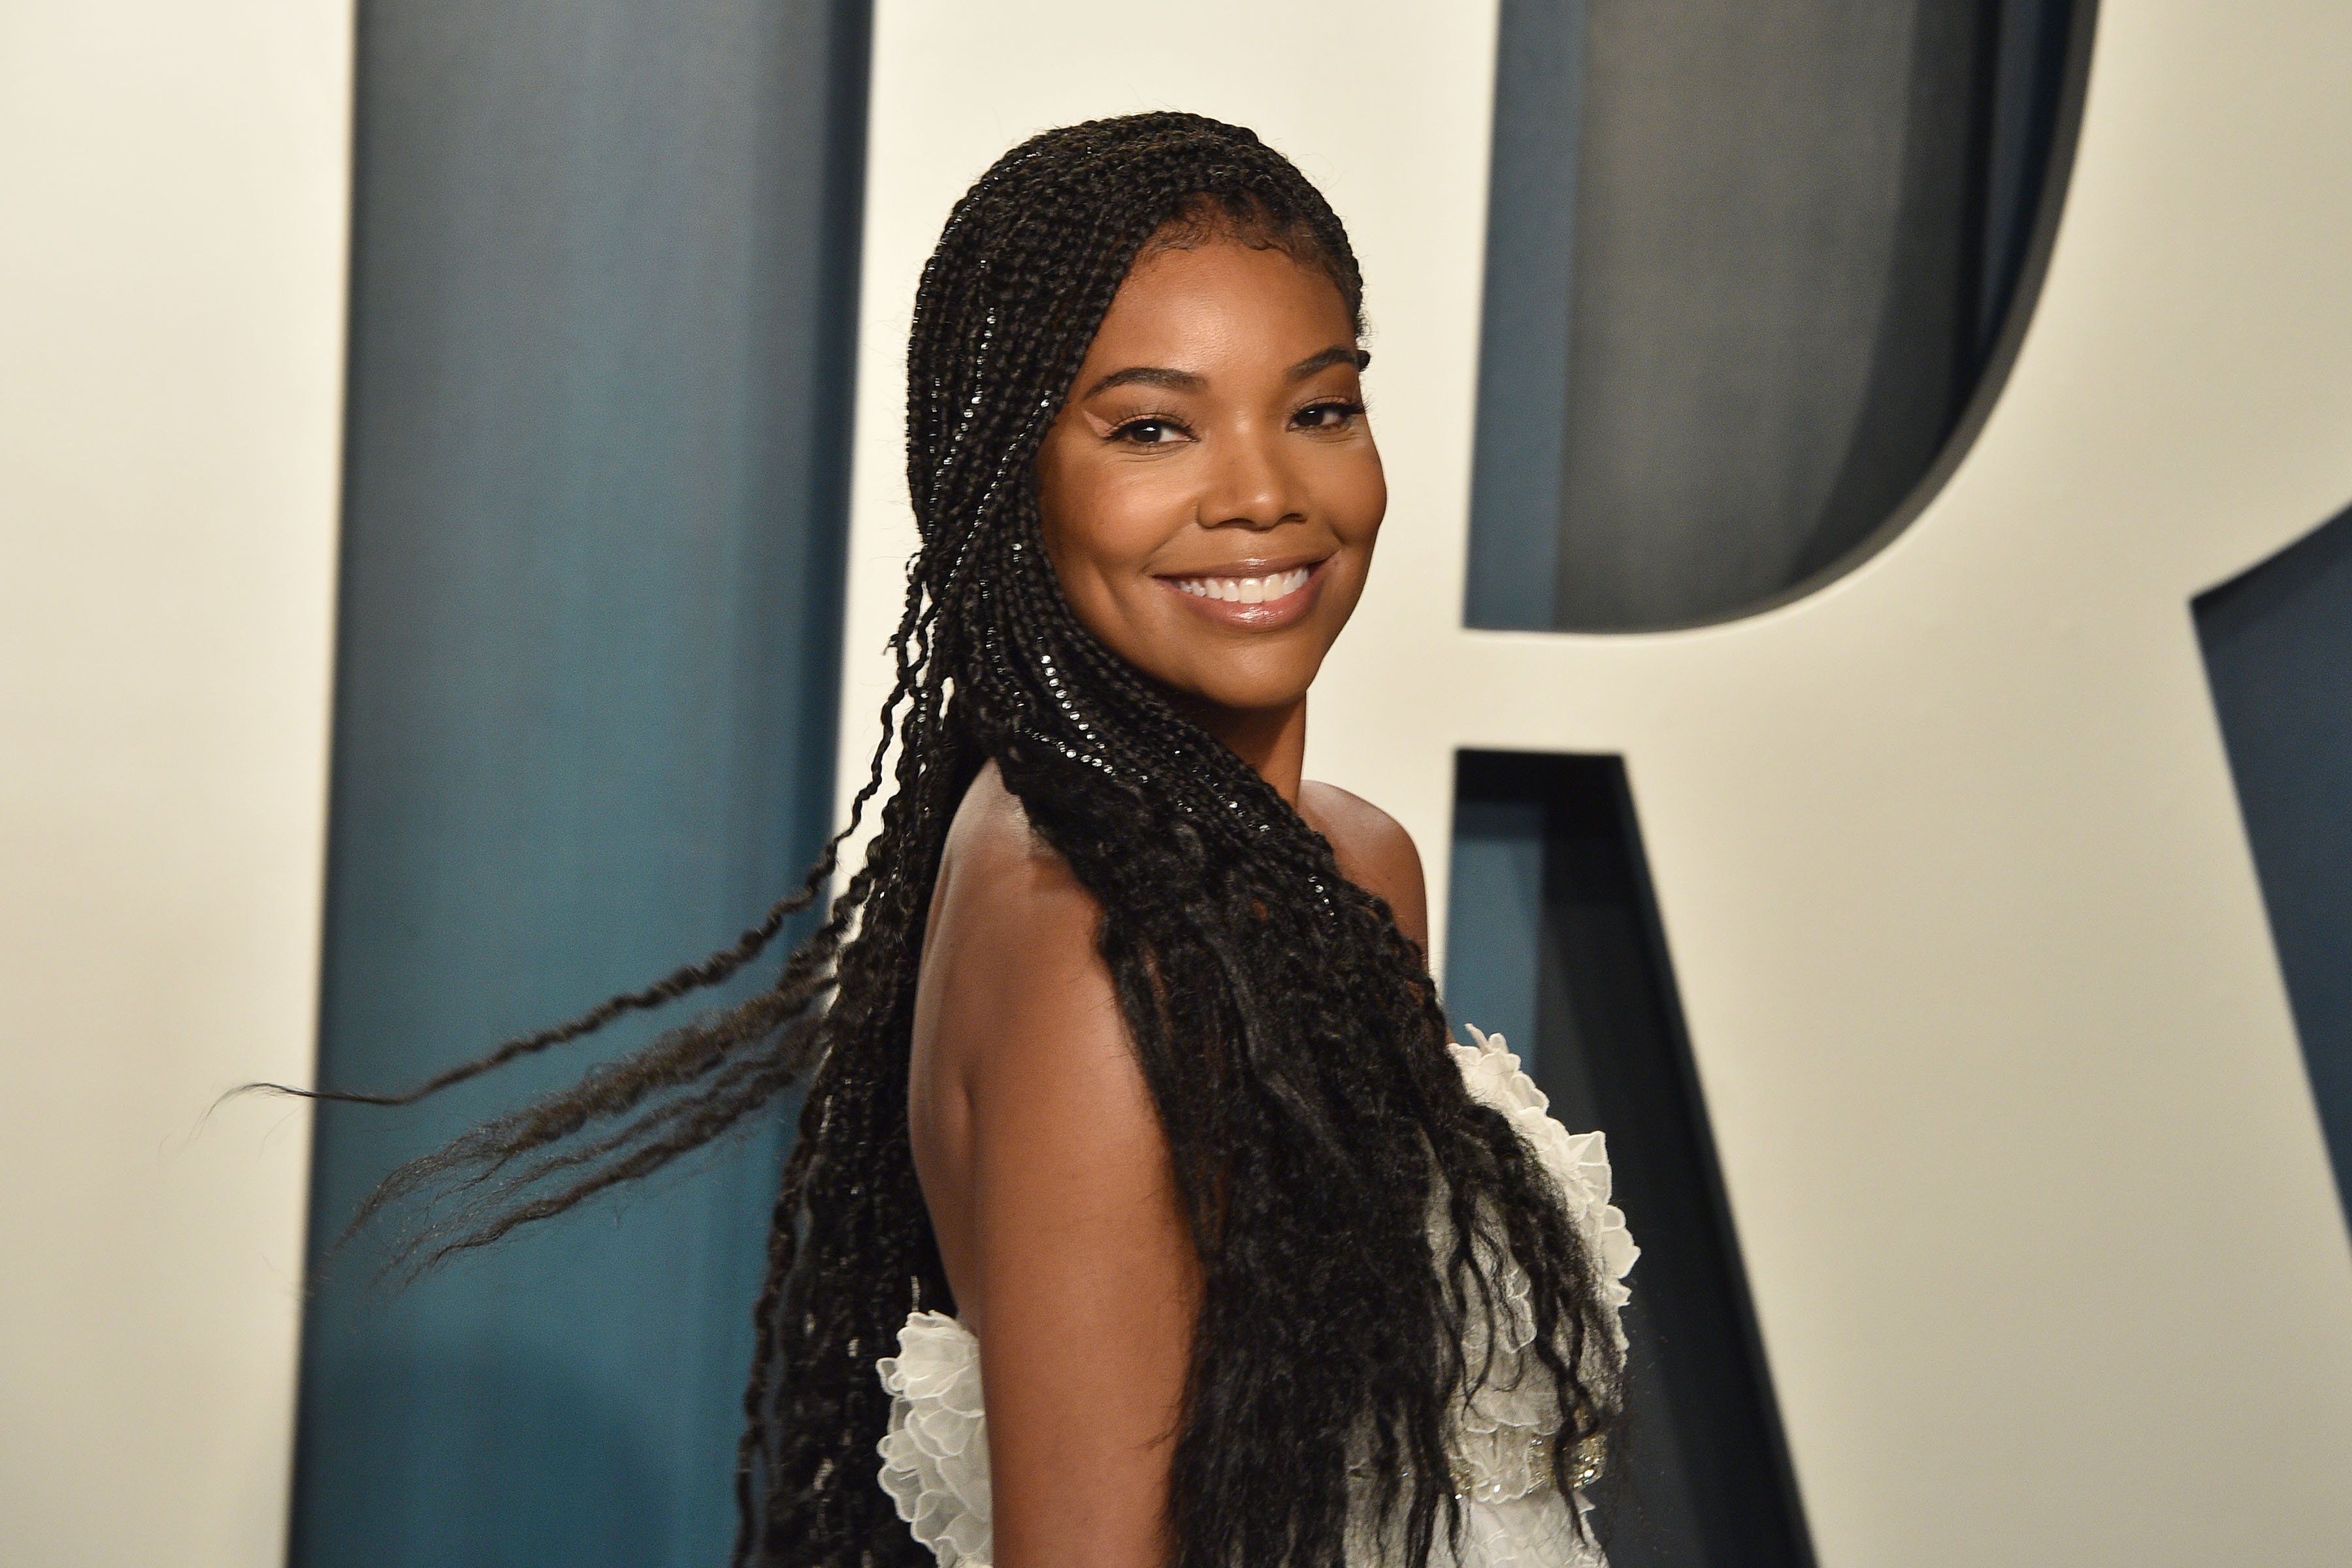 Gabrielle Union poses at the 2020 Vanity Fair Oscar Party at Wallis Annenberg Center for the Performing Arts on February 09, 2020 in Beverly Hills, California. | Source: Getty Images